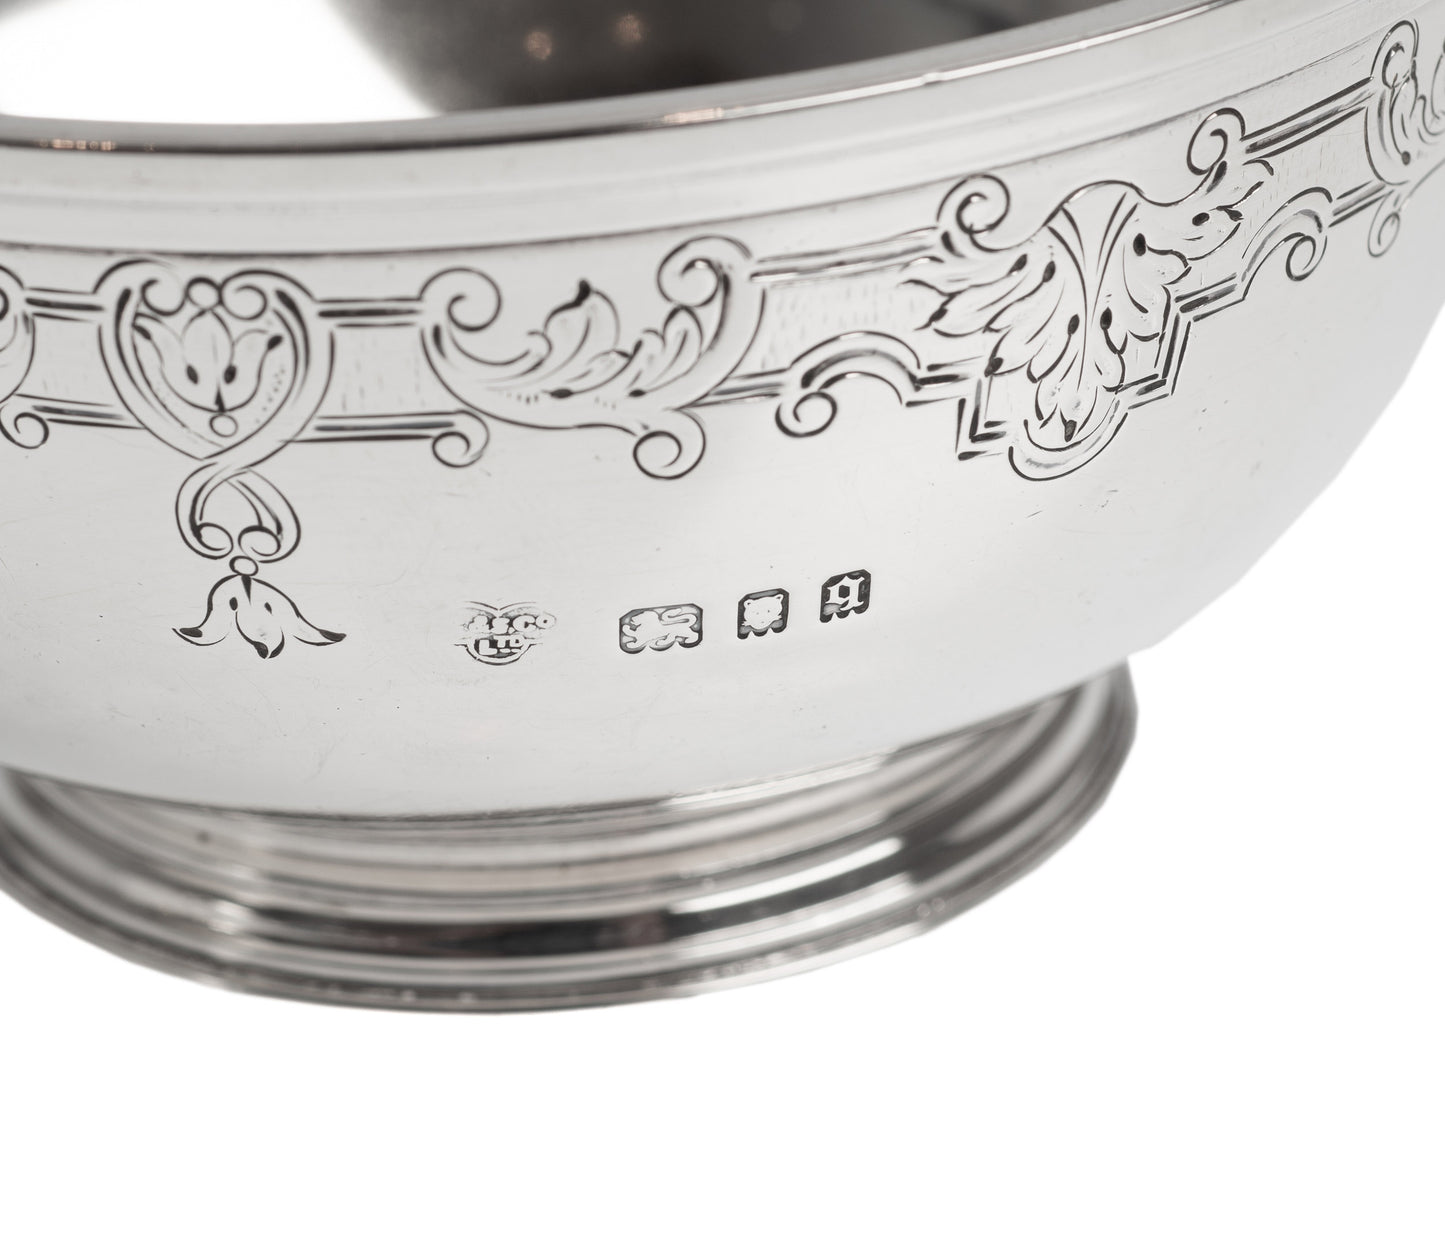 Art Deco Silver Goldsmiths & Silversmiths Heavy Lidded Dish with Chased Detail (Code 2325)